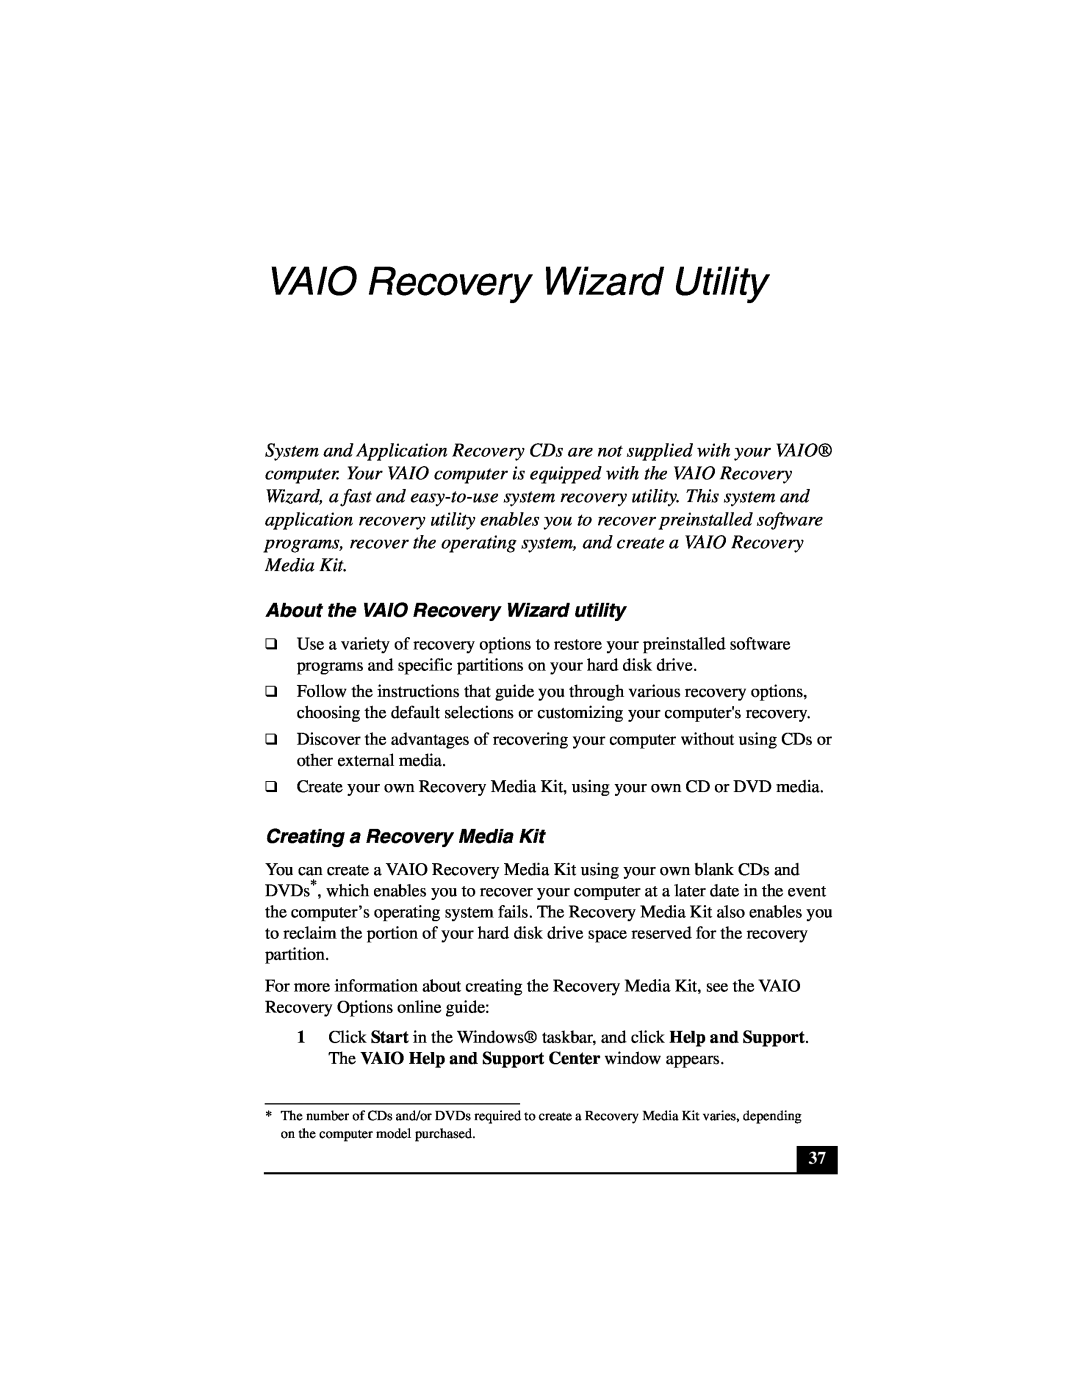 Sony VGN-S100 VAIO Recovery Wizard Utility, About the VAIO Recovery Wizard utility, Creating a Recovery Media Kit 